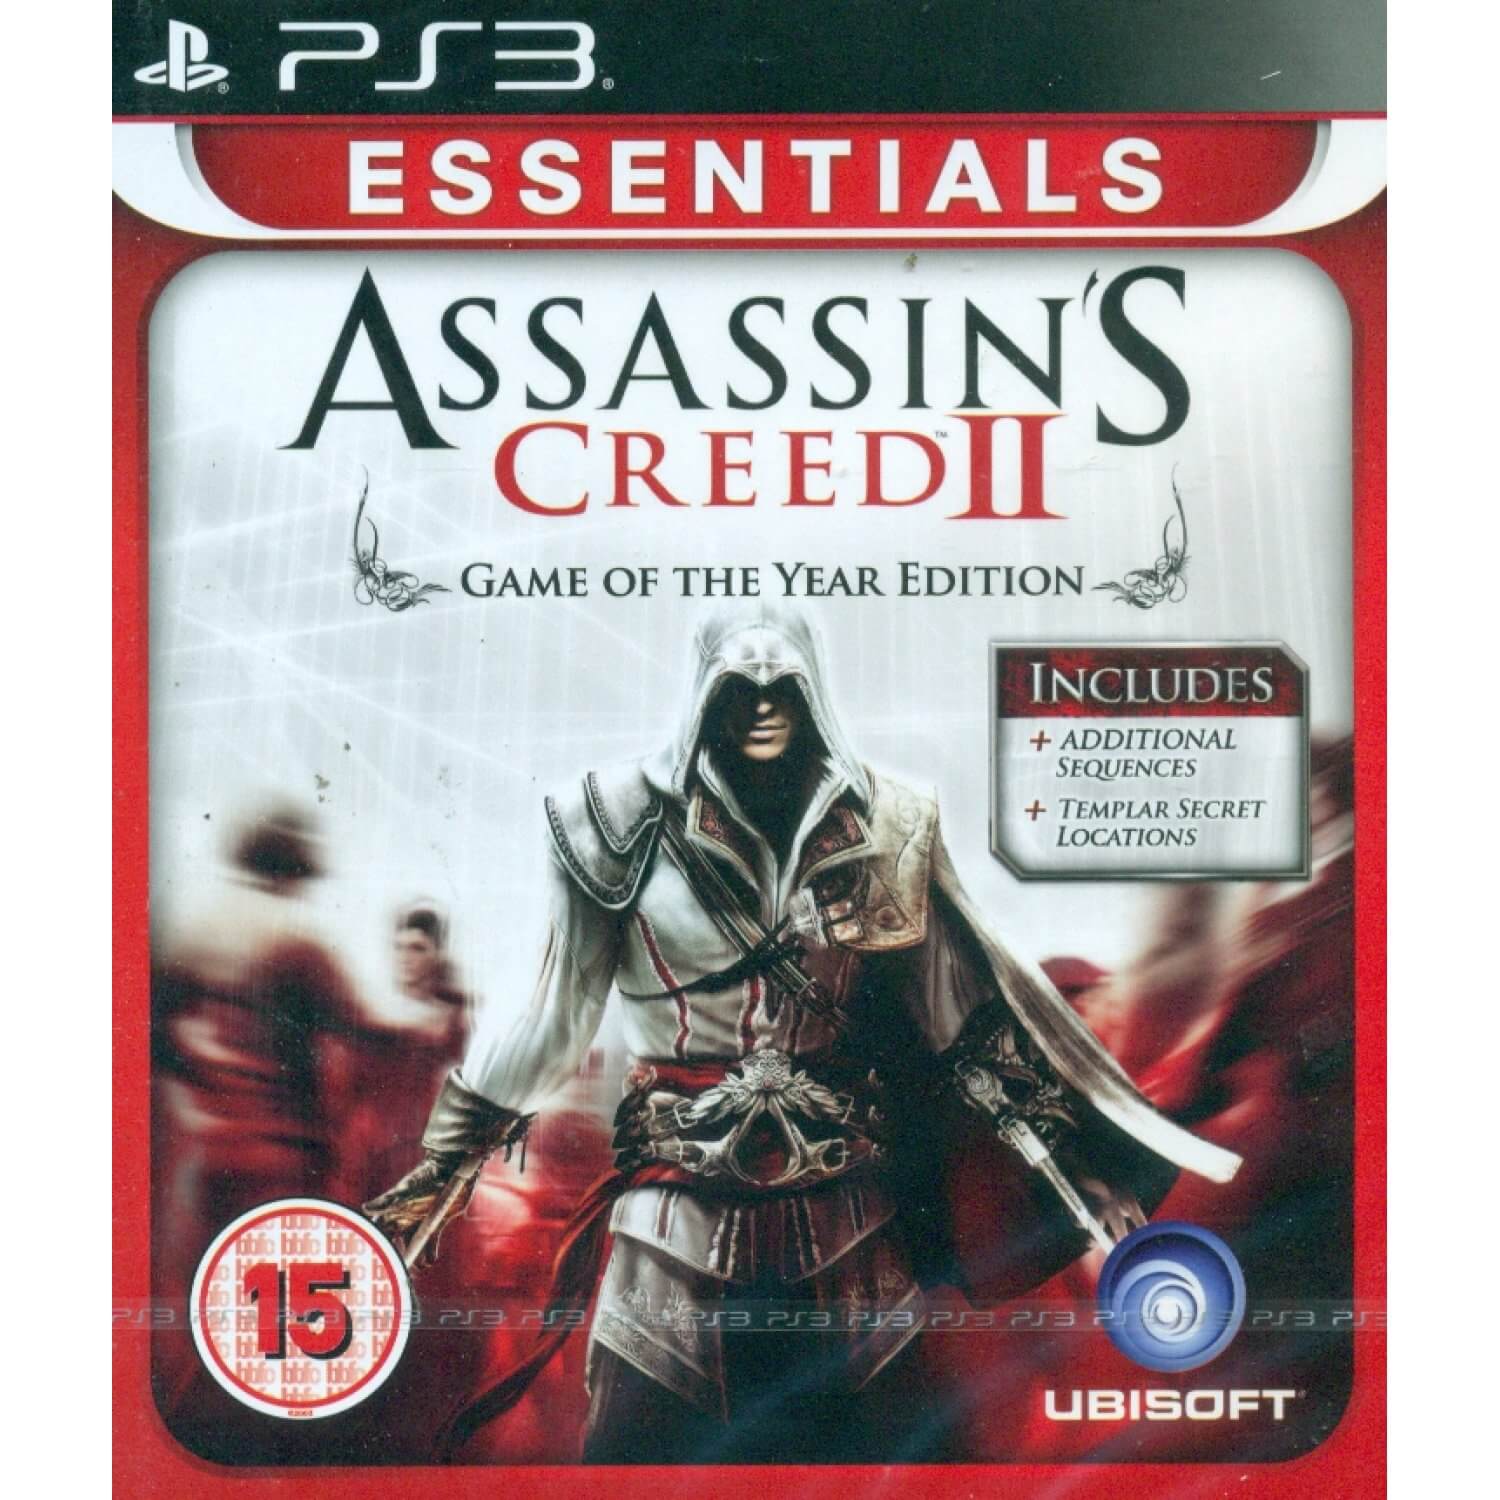 Assassin’s Creed II: Game of the Year Edition